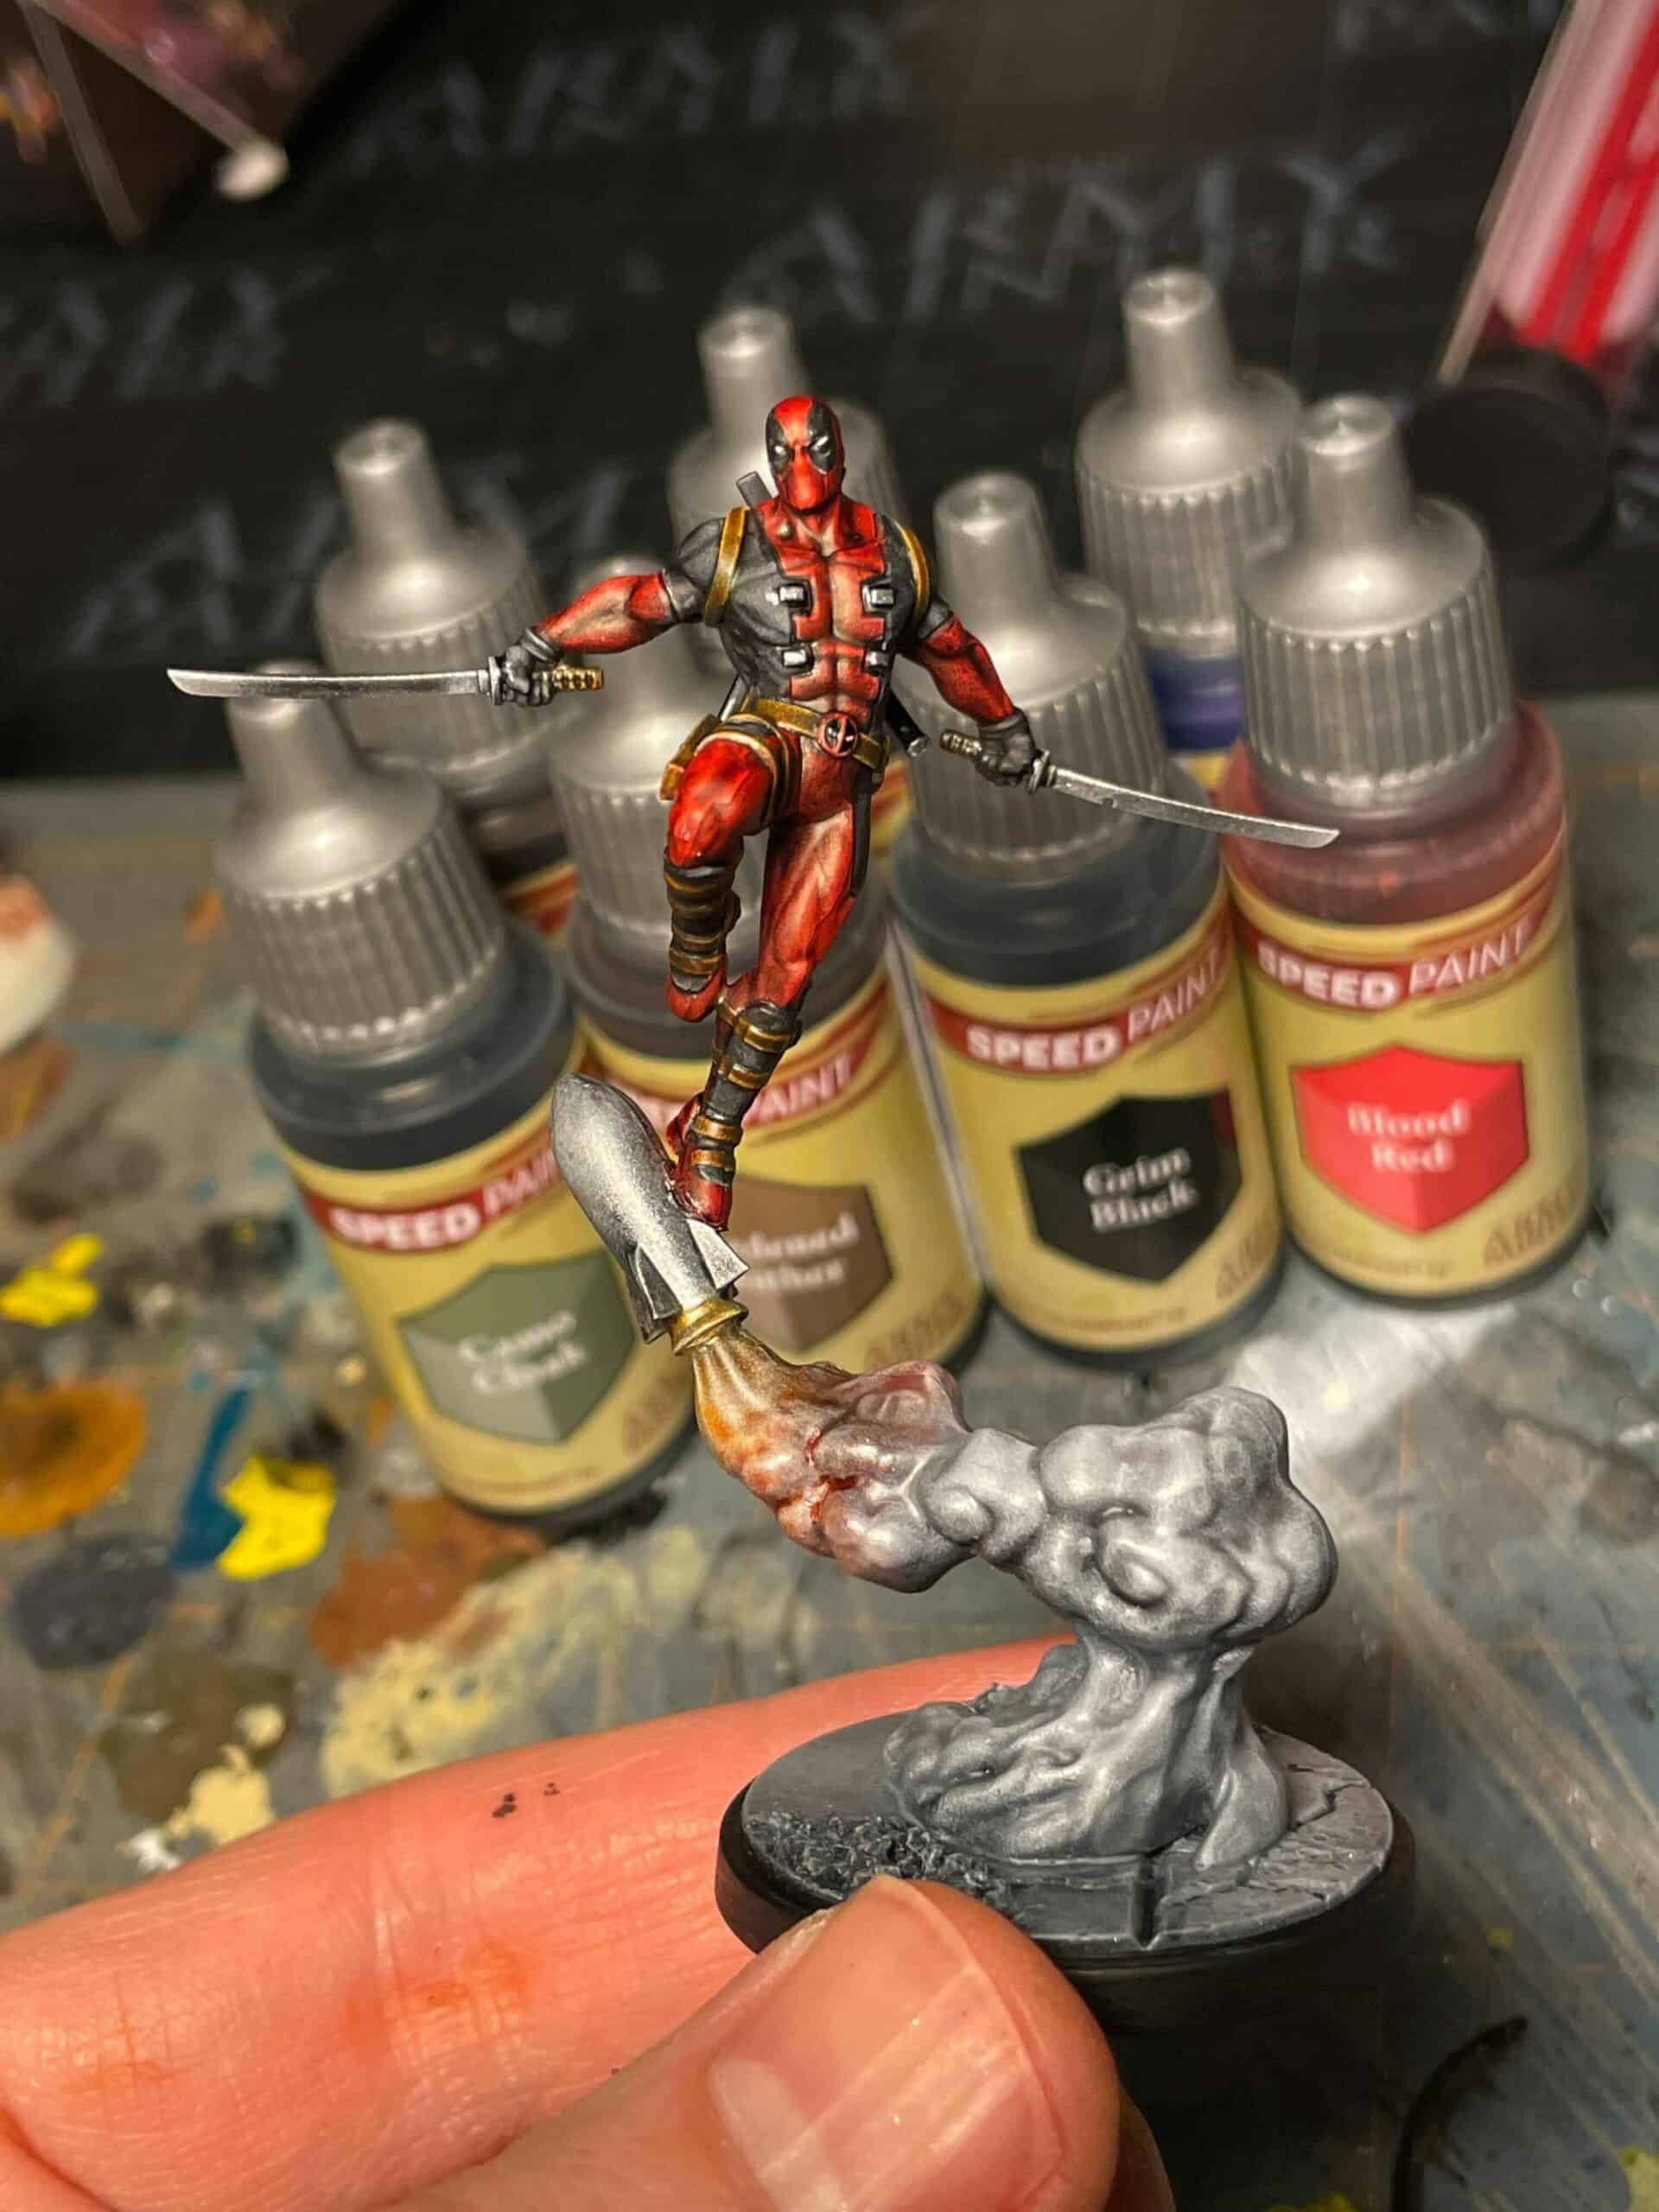 Did Army Painter Just Make the BEST Miniature Paints??? 